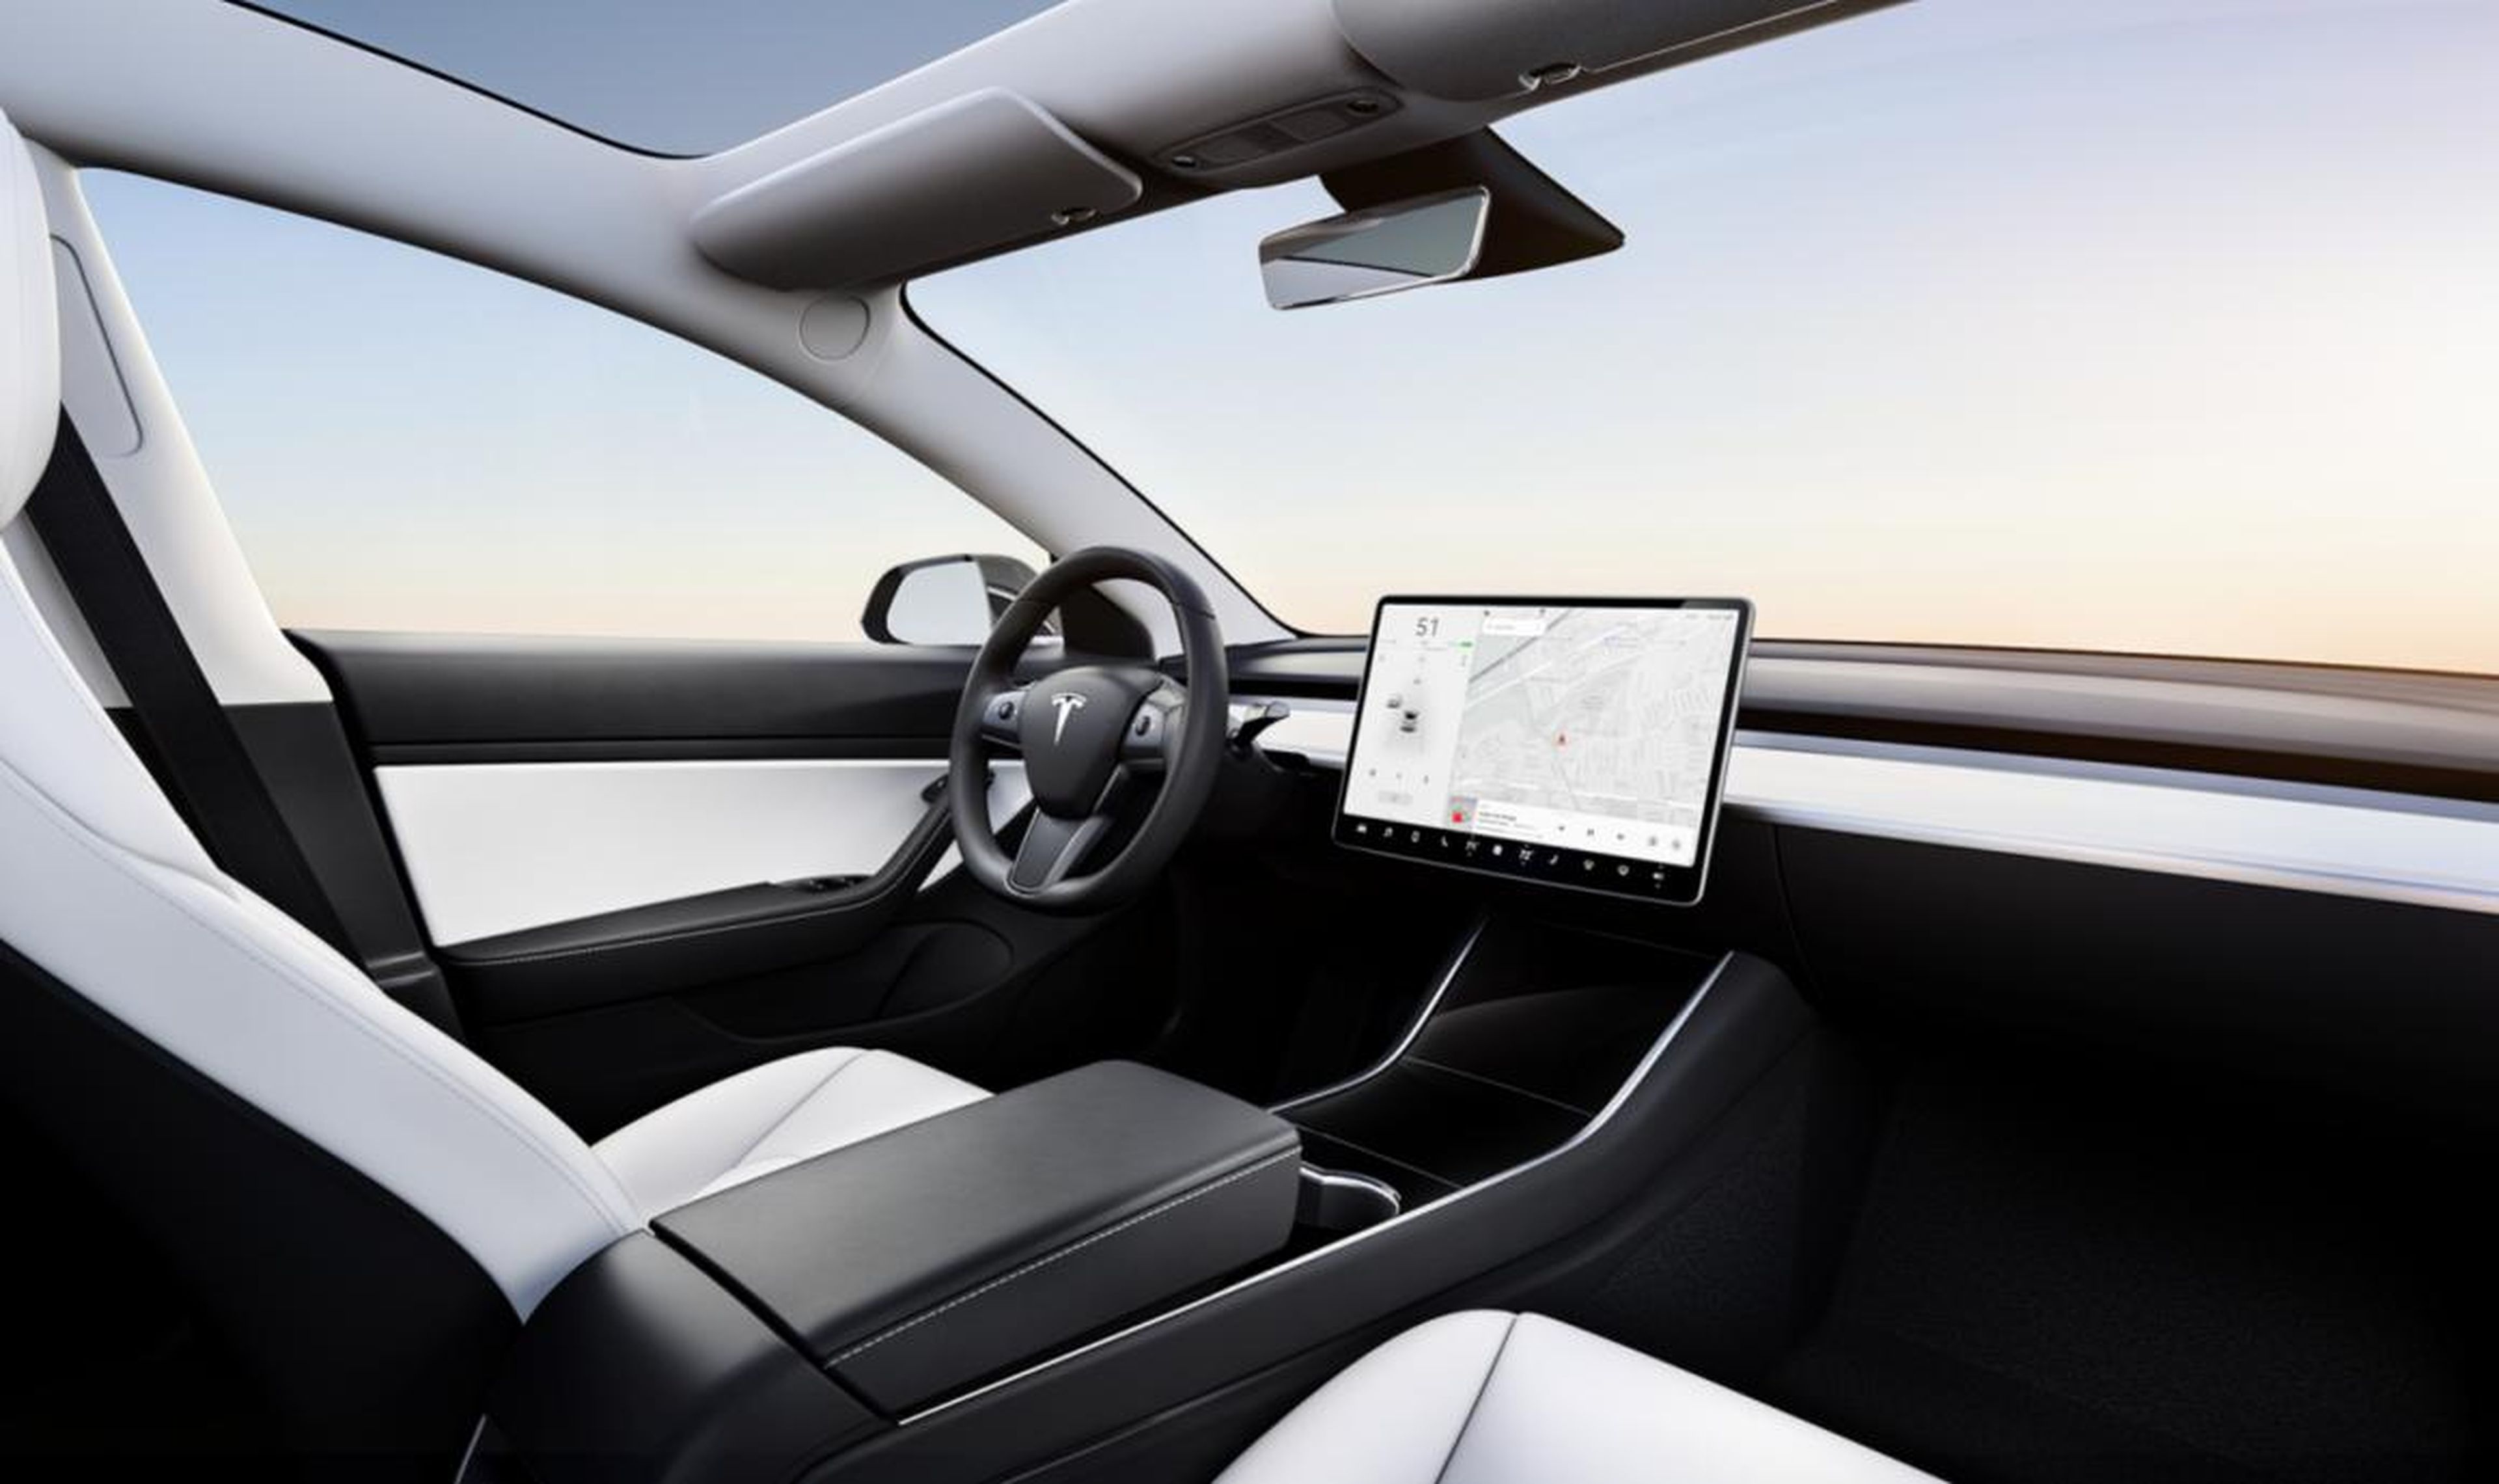 6. The standard Model 3 can only come with a premium black interior. The Model 3 Performance can also be had in a nice-looking premium white option, which you can see below.